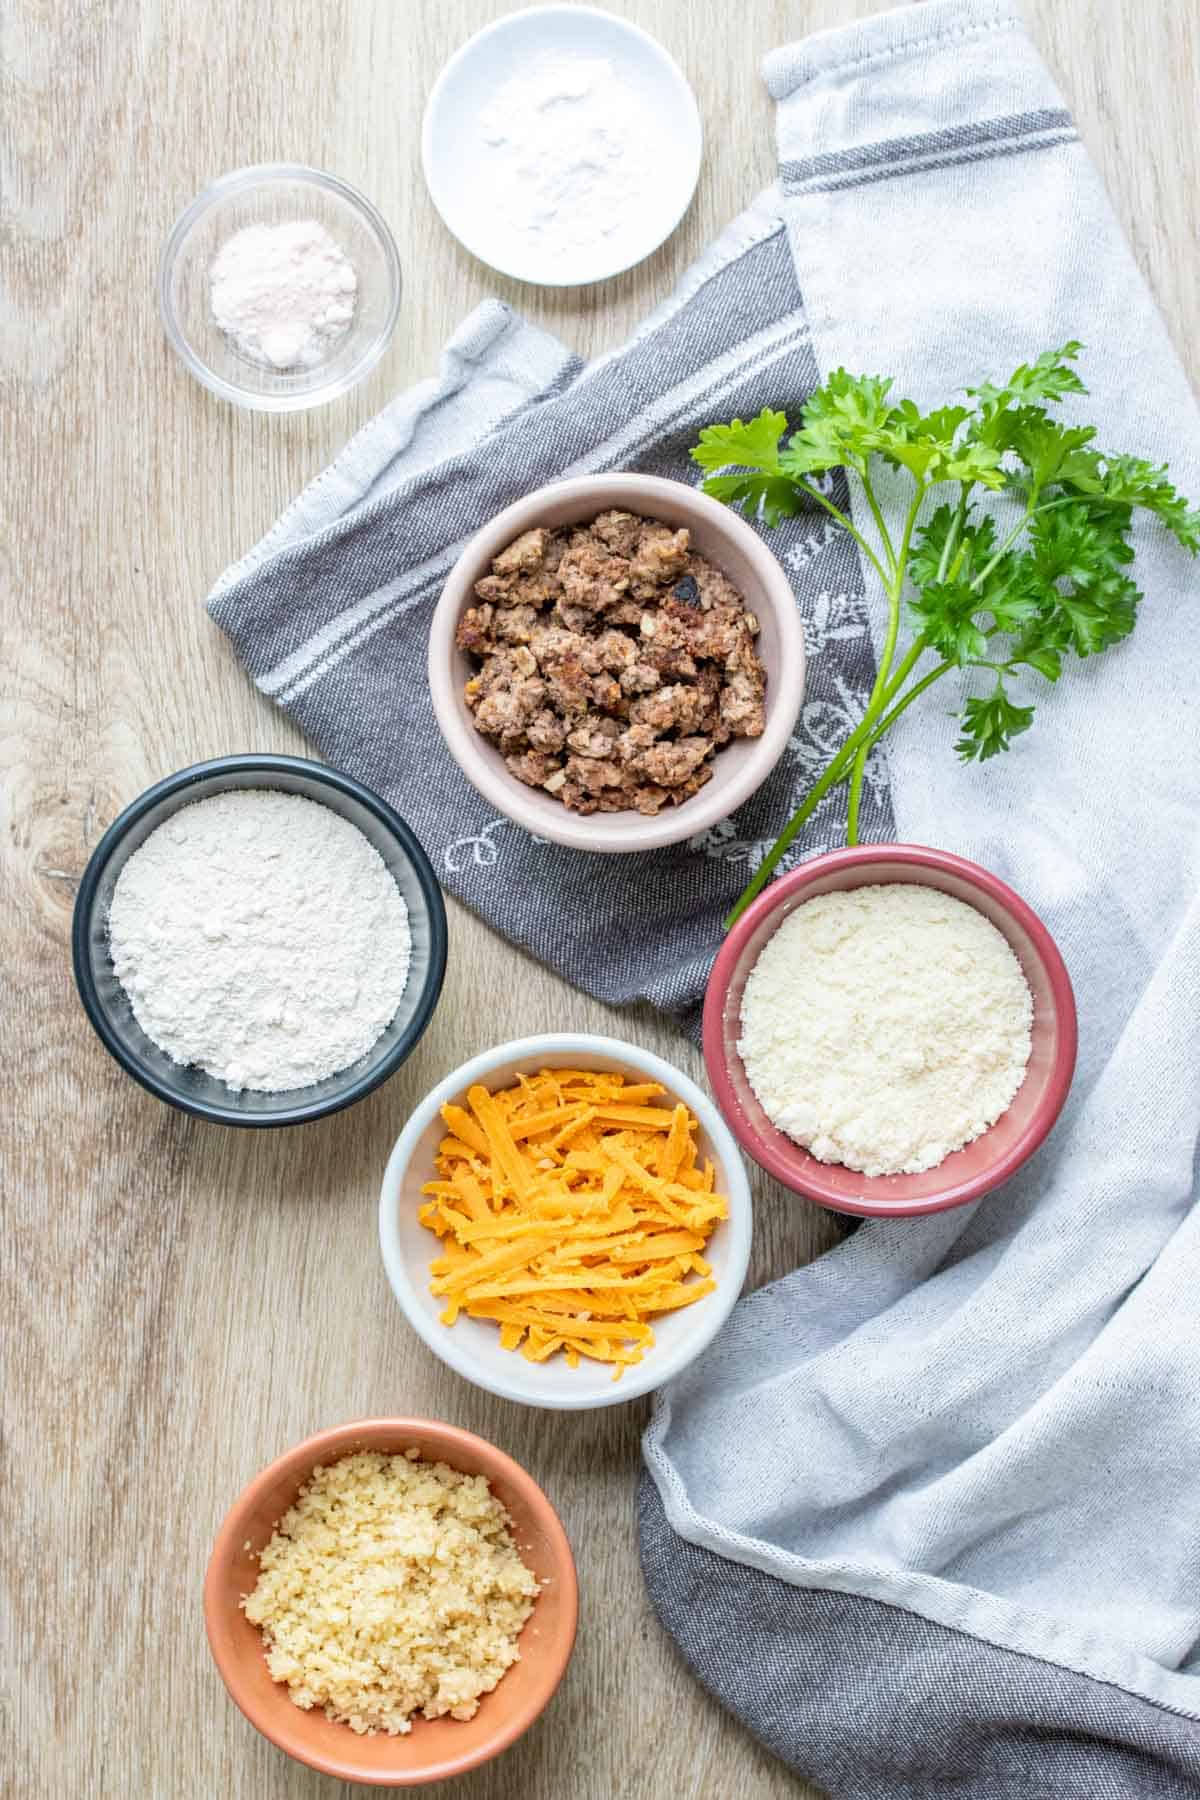 Bowls with flours, cheese, crumbled sausage baking powder and salt on a wooden surface with parsley.